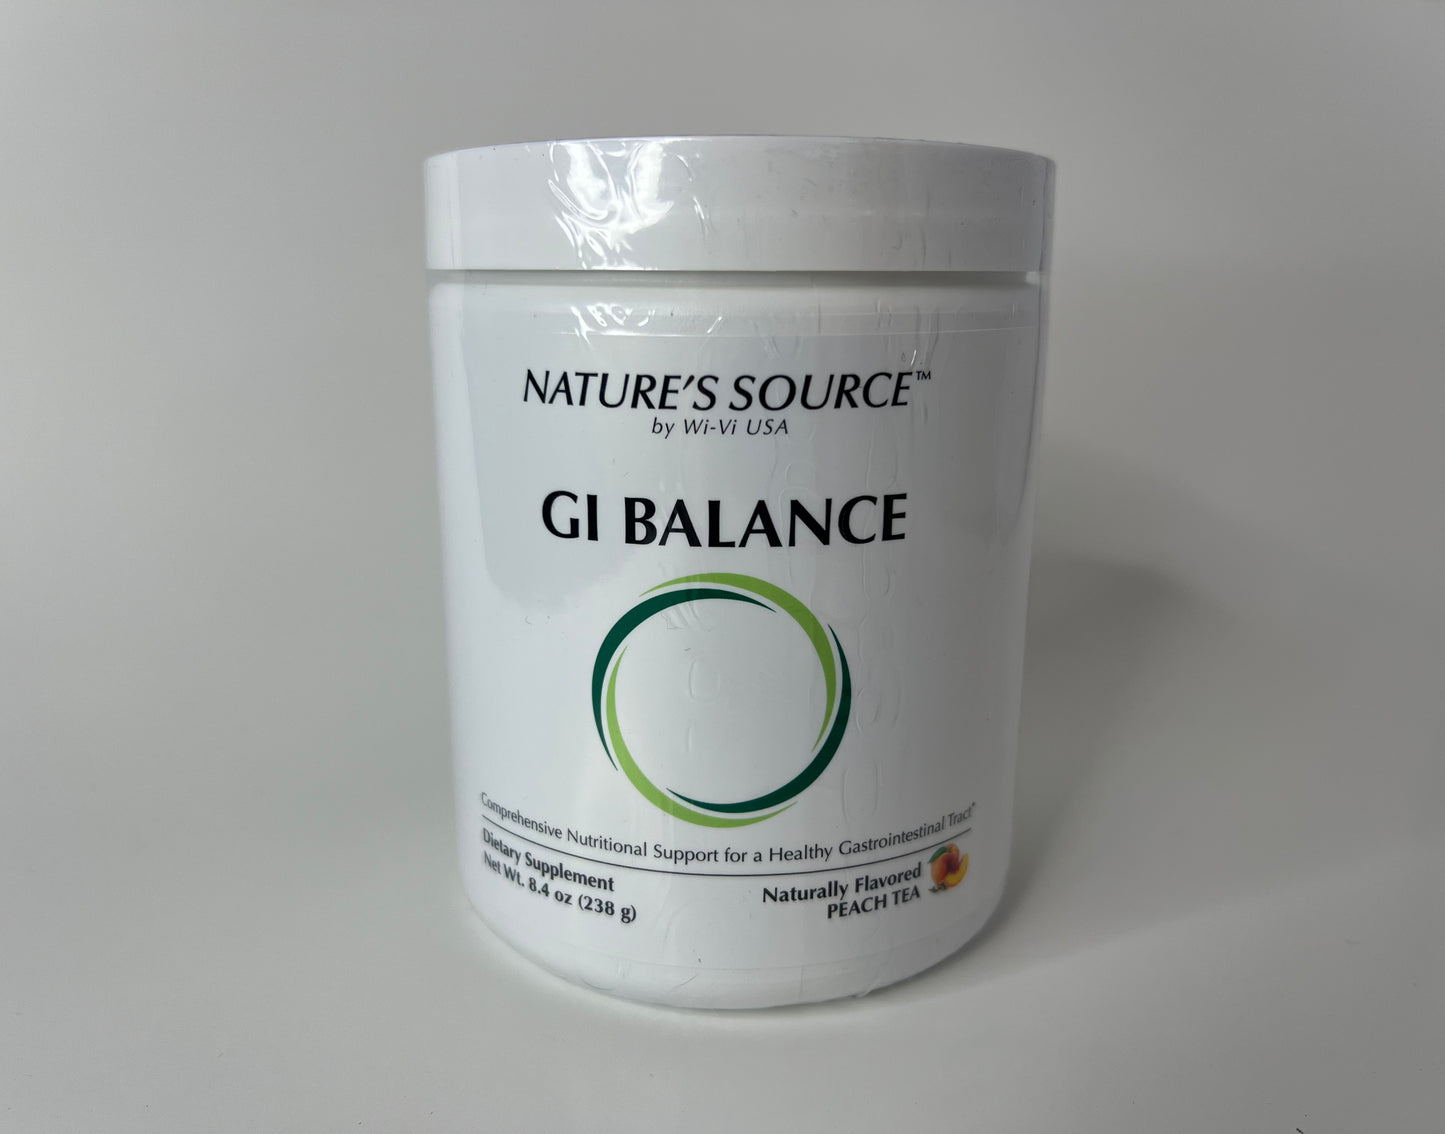 G I Balance - Comprehensive Nutritional Support for a Healthy Gastrointestinal Tract -by: Nature's Source